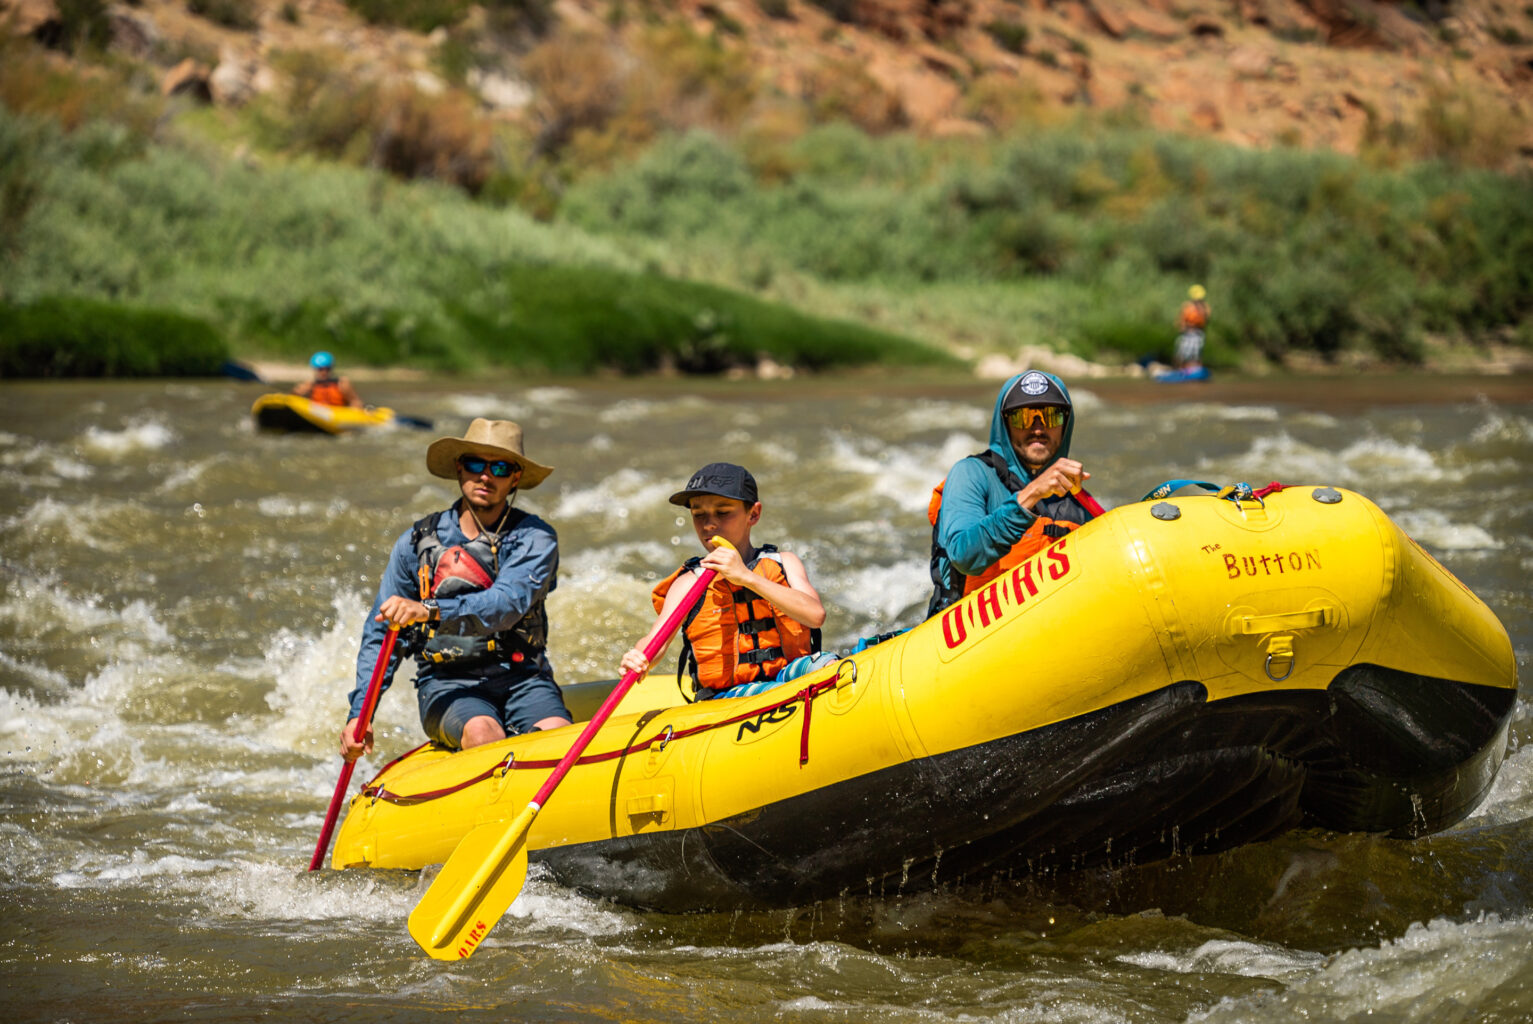 A guide in a large hat paddles two guests including a pre-teen boy in Class II whitewater on the Colorado River through Westwater Canyon, Ut. In the background, a person in an inflatable kayak and another on a stand-up paddleboat tackle the fun waves on this OARS rafting adventure